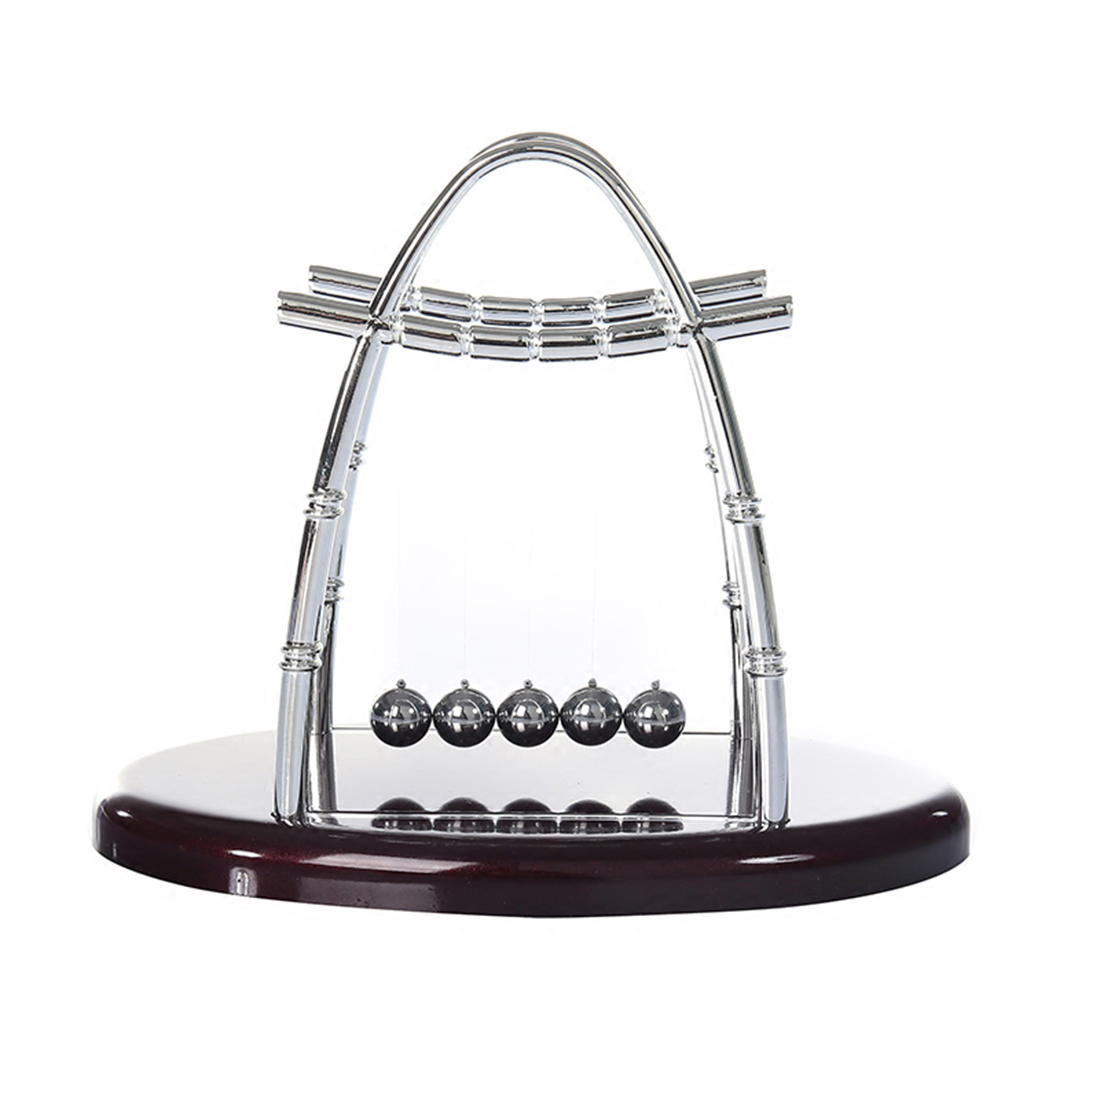 Surwish Arc Shaped Newton Cradle Balance Ball Science Puzzle Fun Desk Toy for Stress Reliever